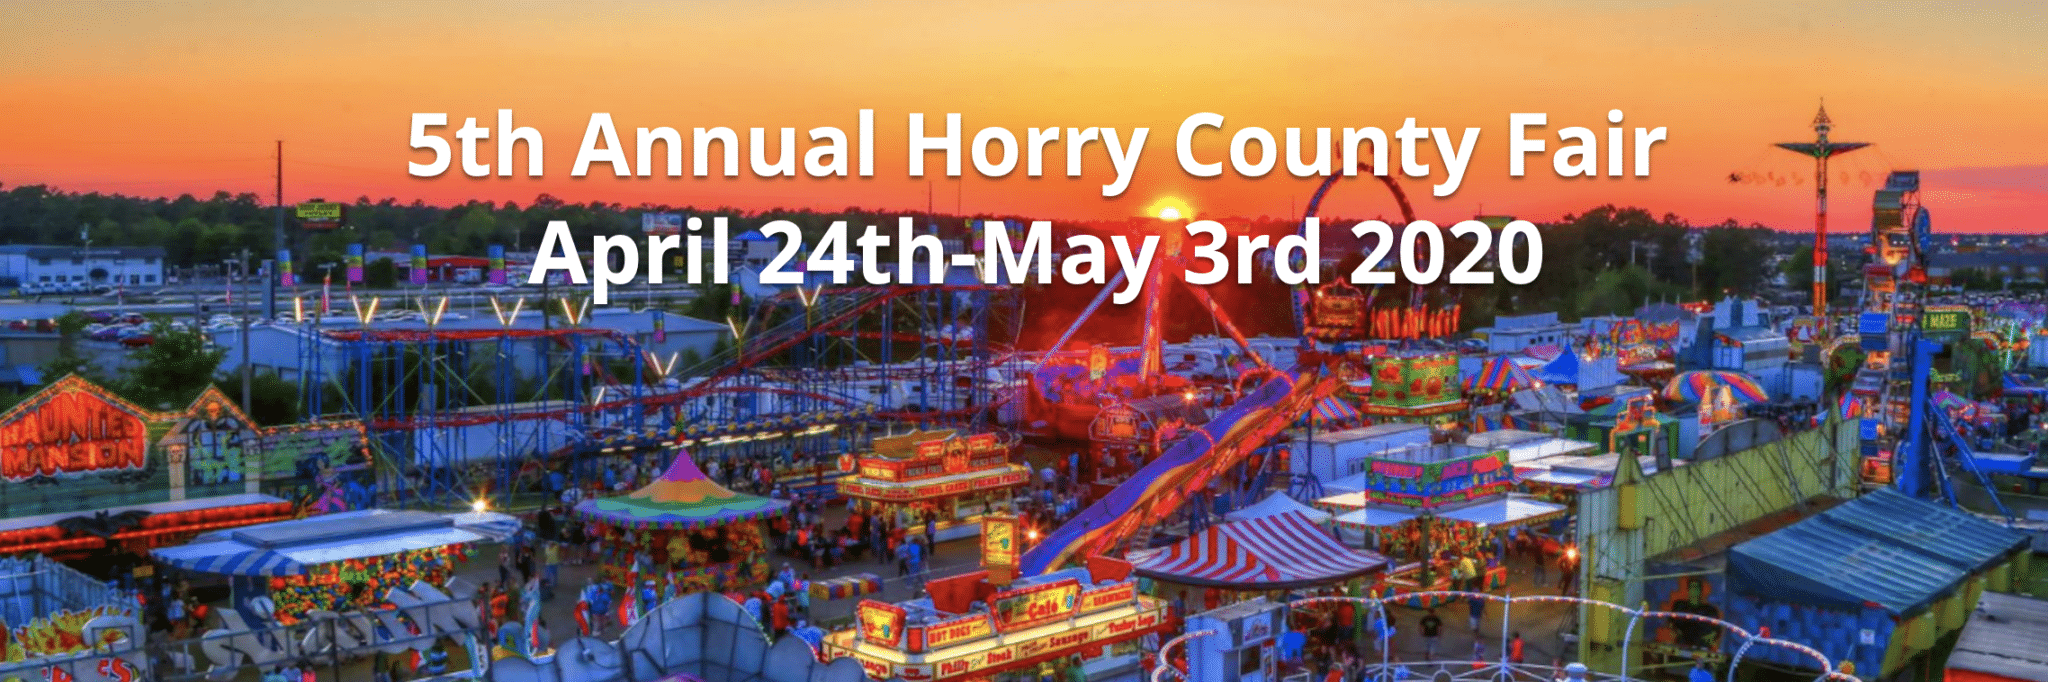 Overview of the Horry County Fair